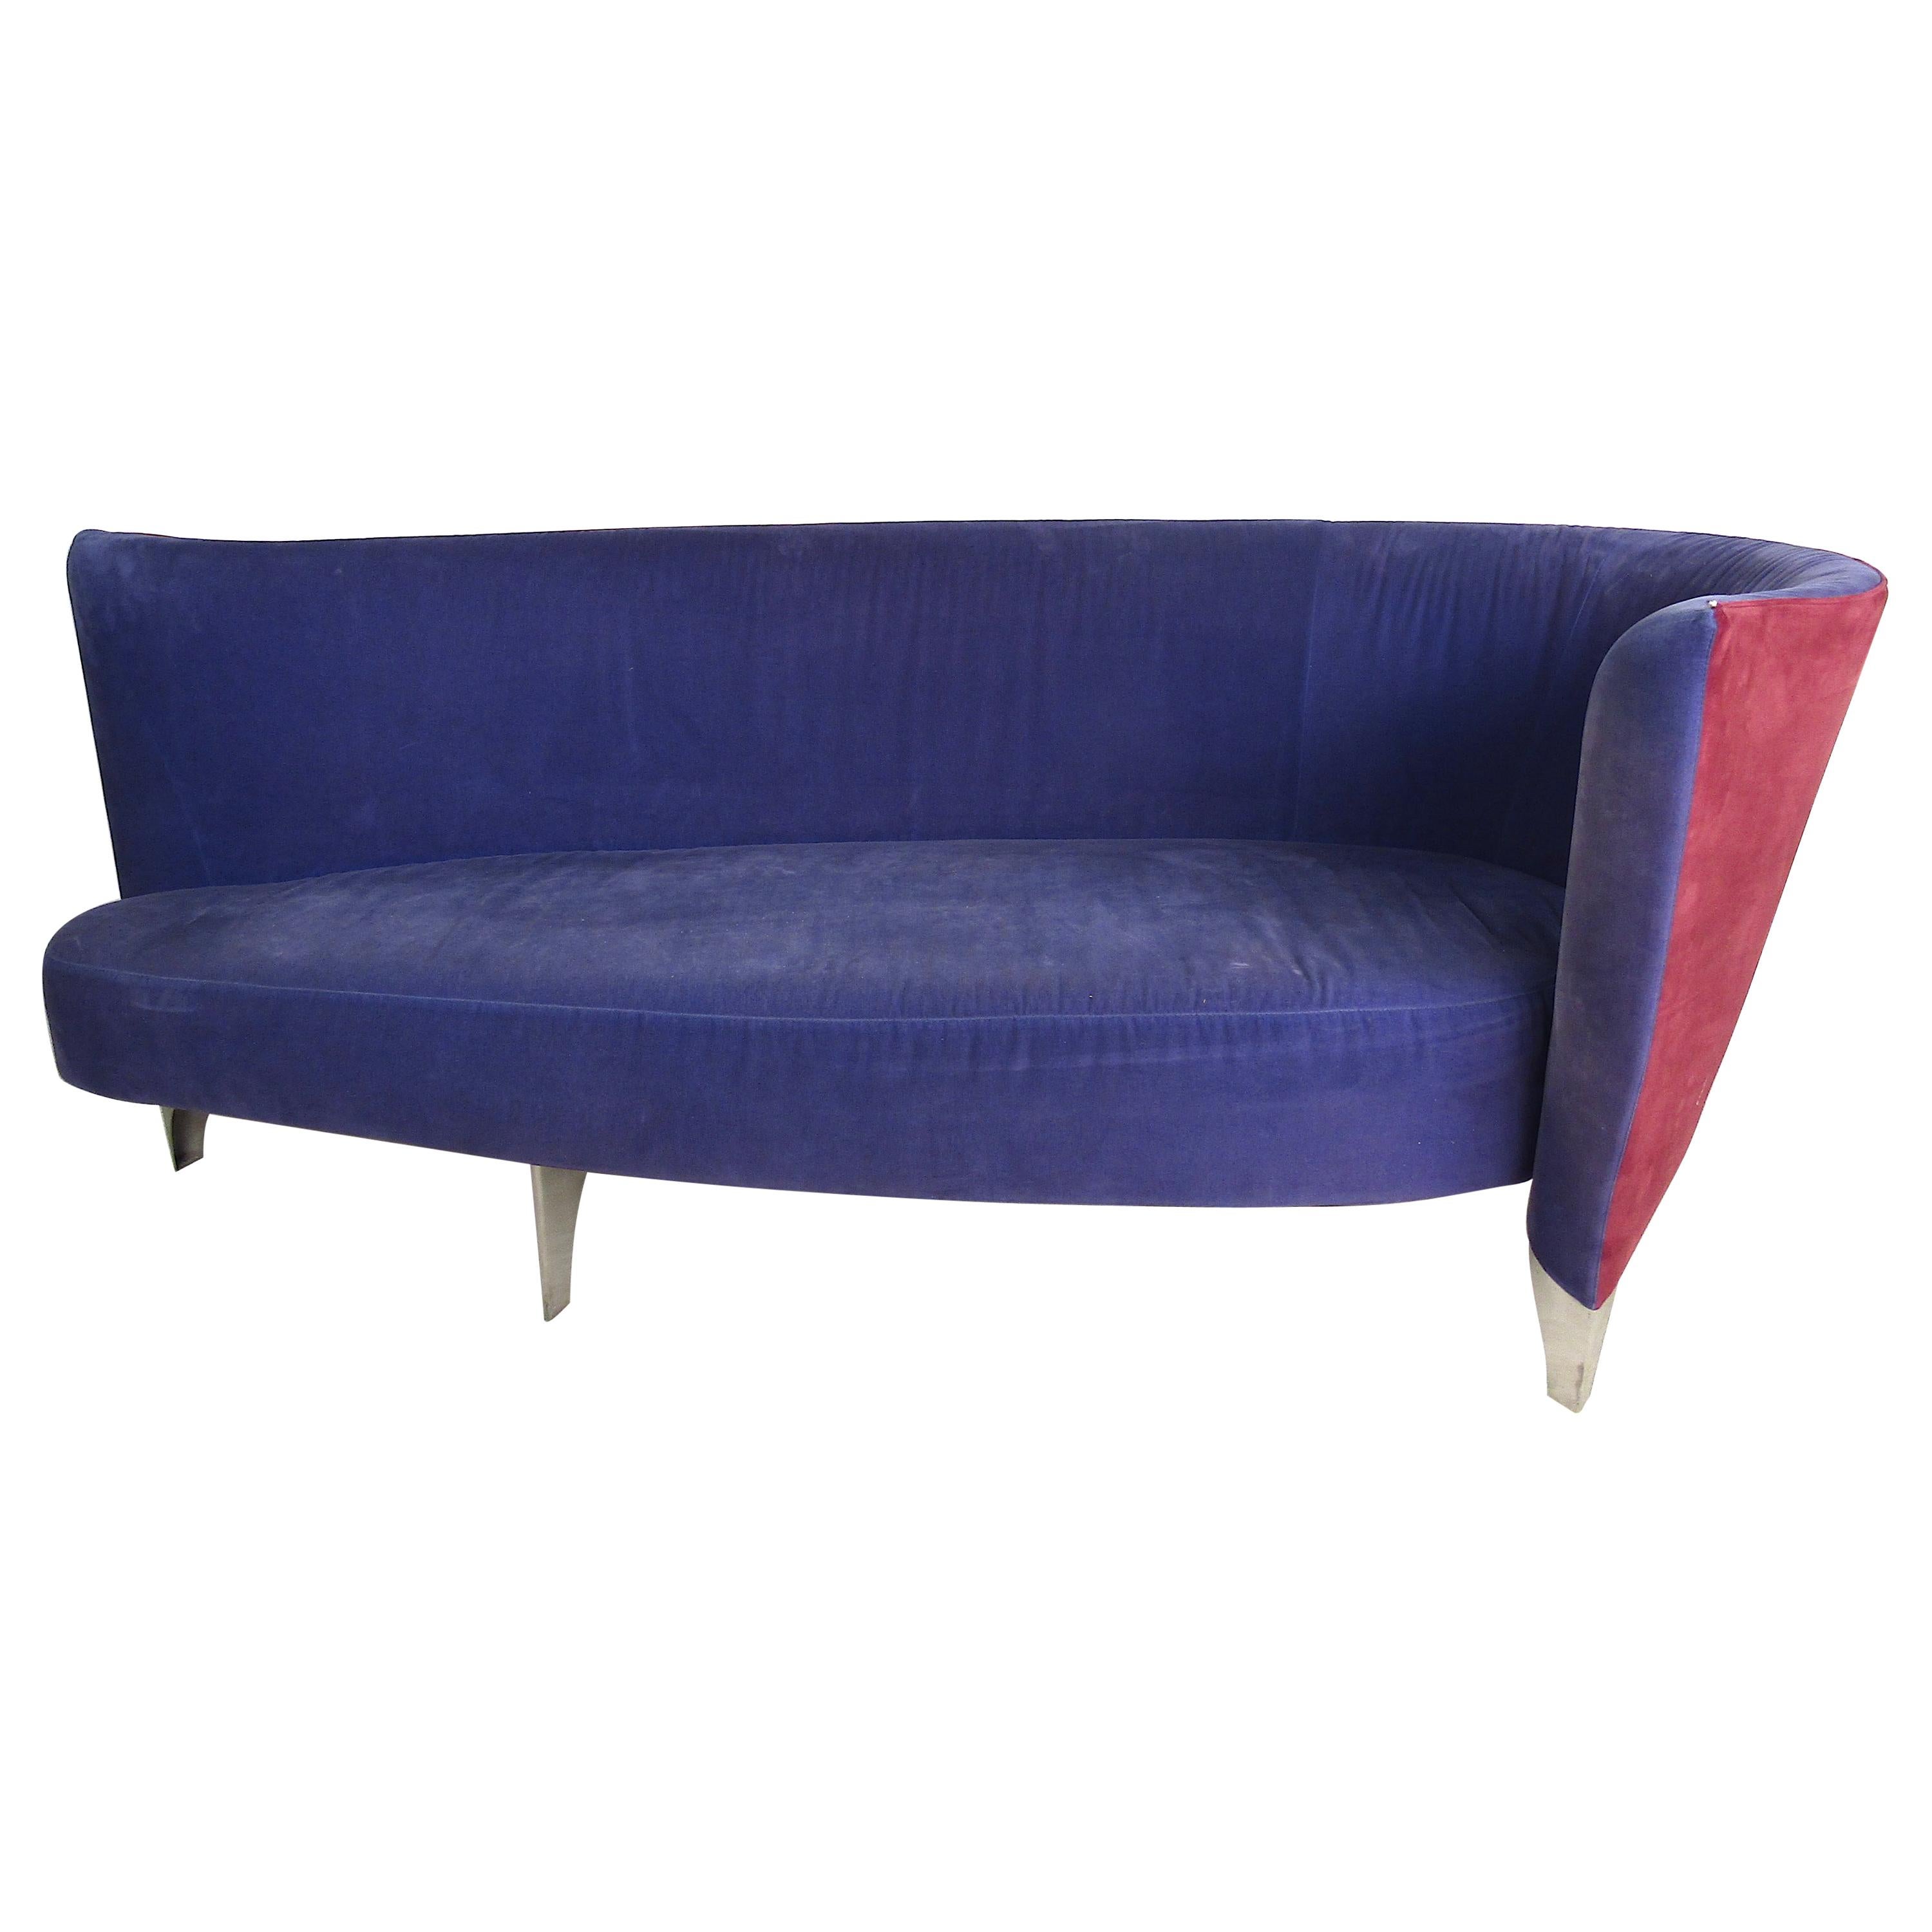 Wild Sculpted Two-Tone Italian Sofa/Daybed with Metal Legs